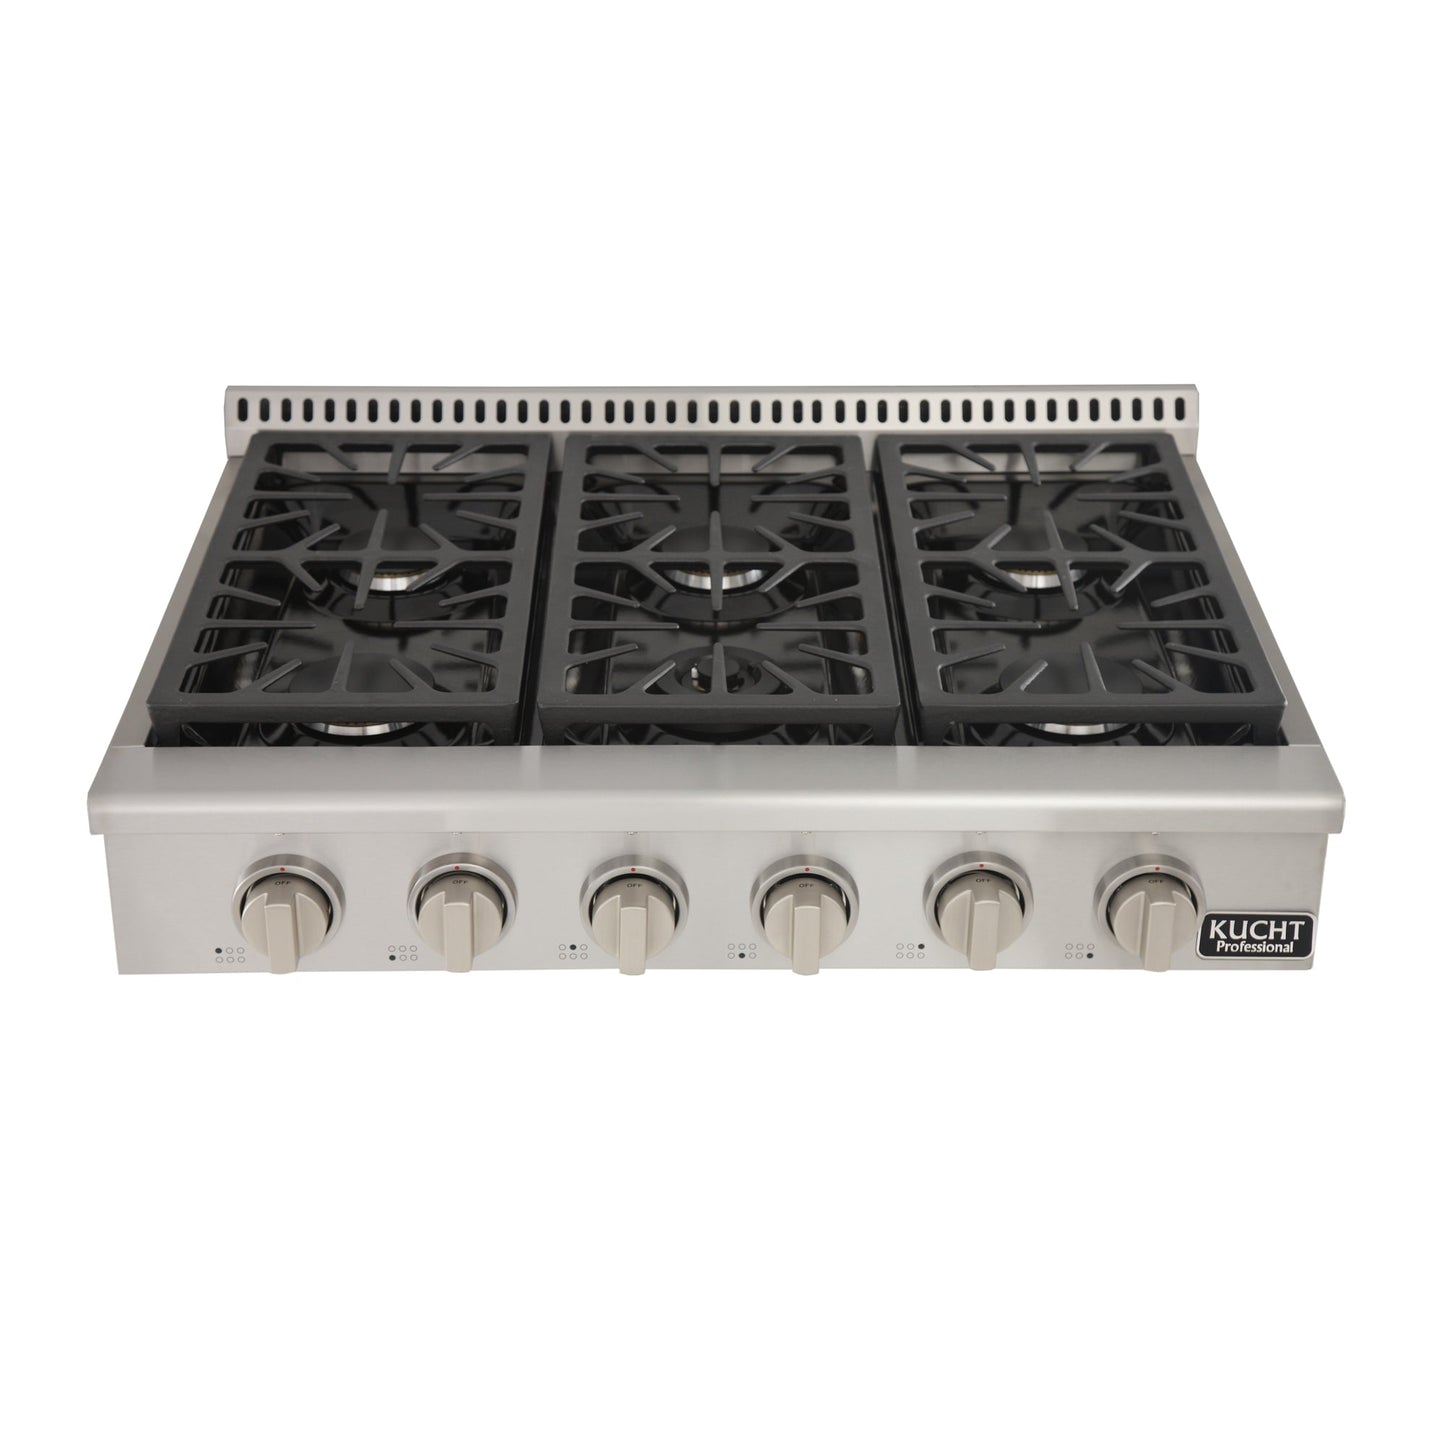 Kucht KRT Series 36" Propane Gas Range-Top With 6 Burners and Tuxedo Black Knobs